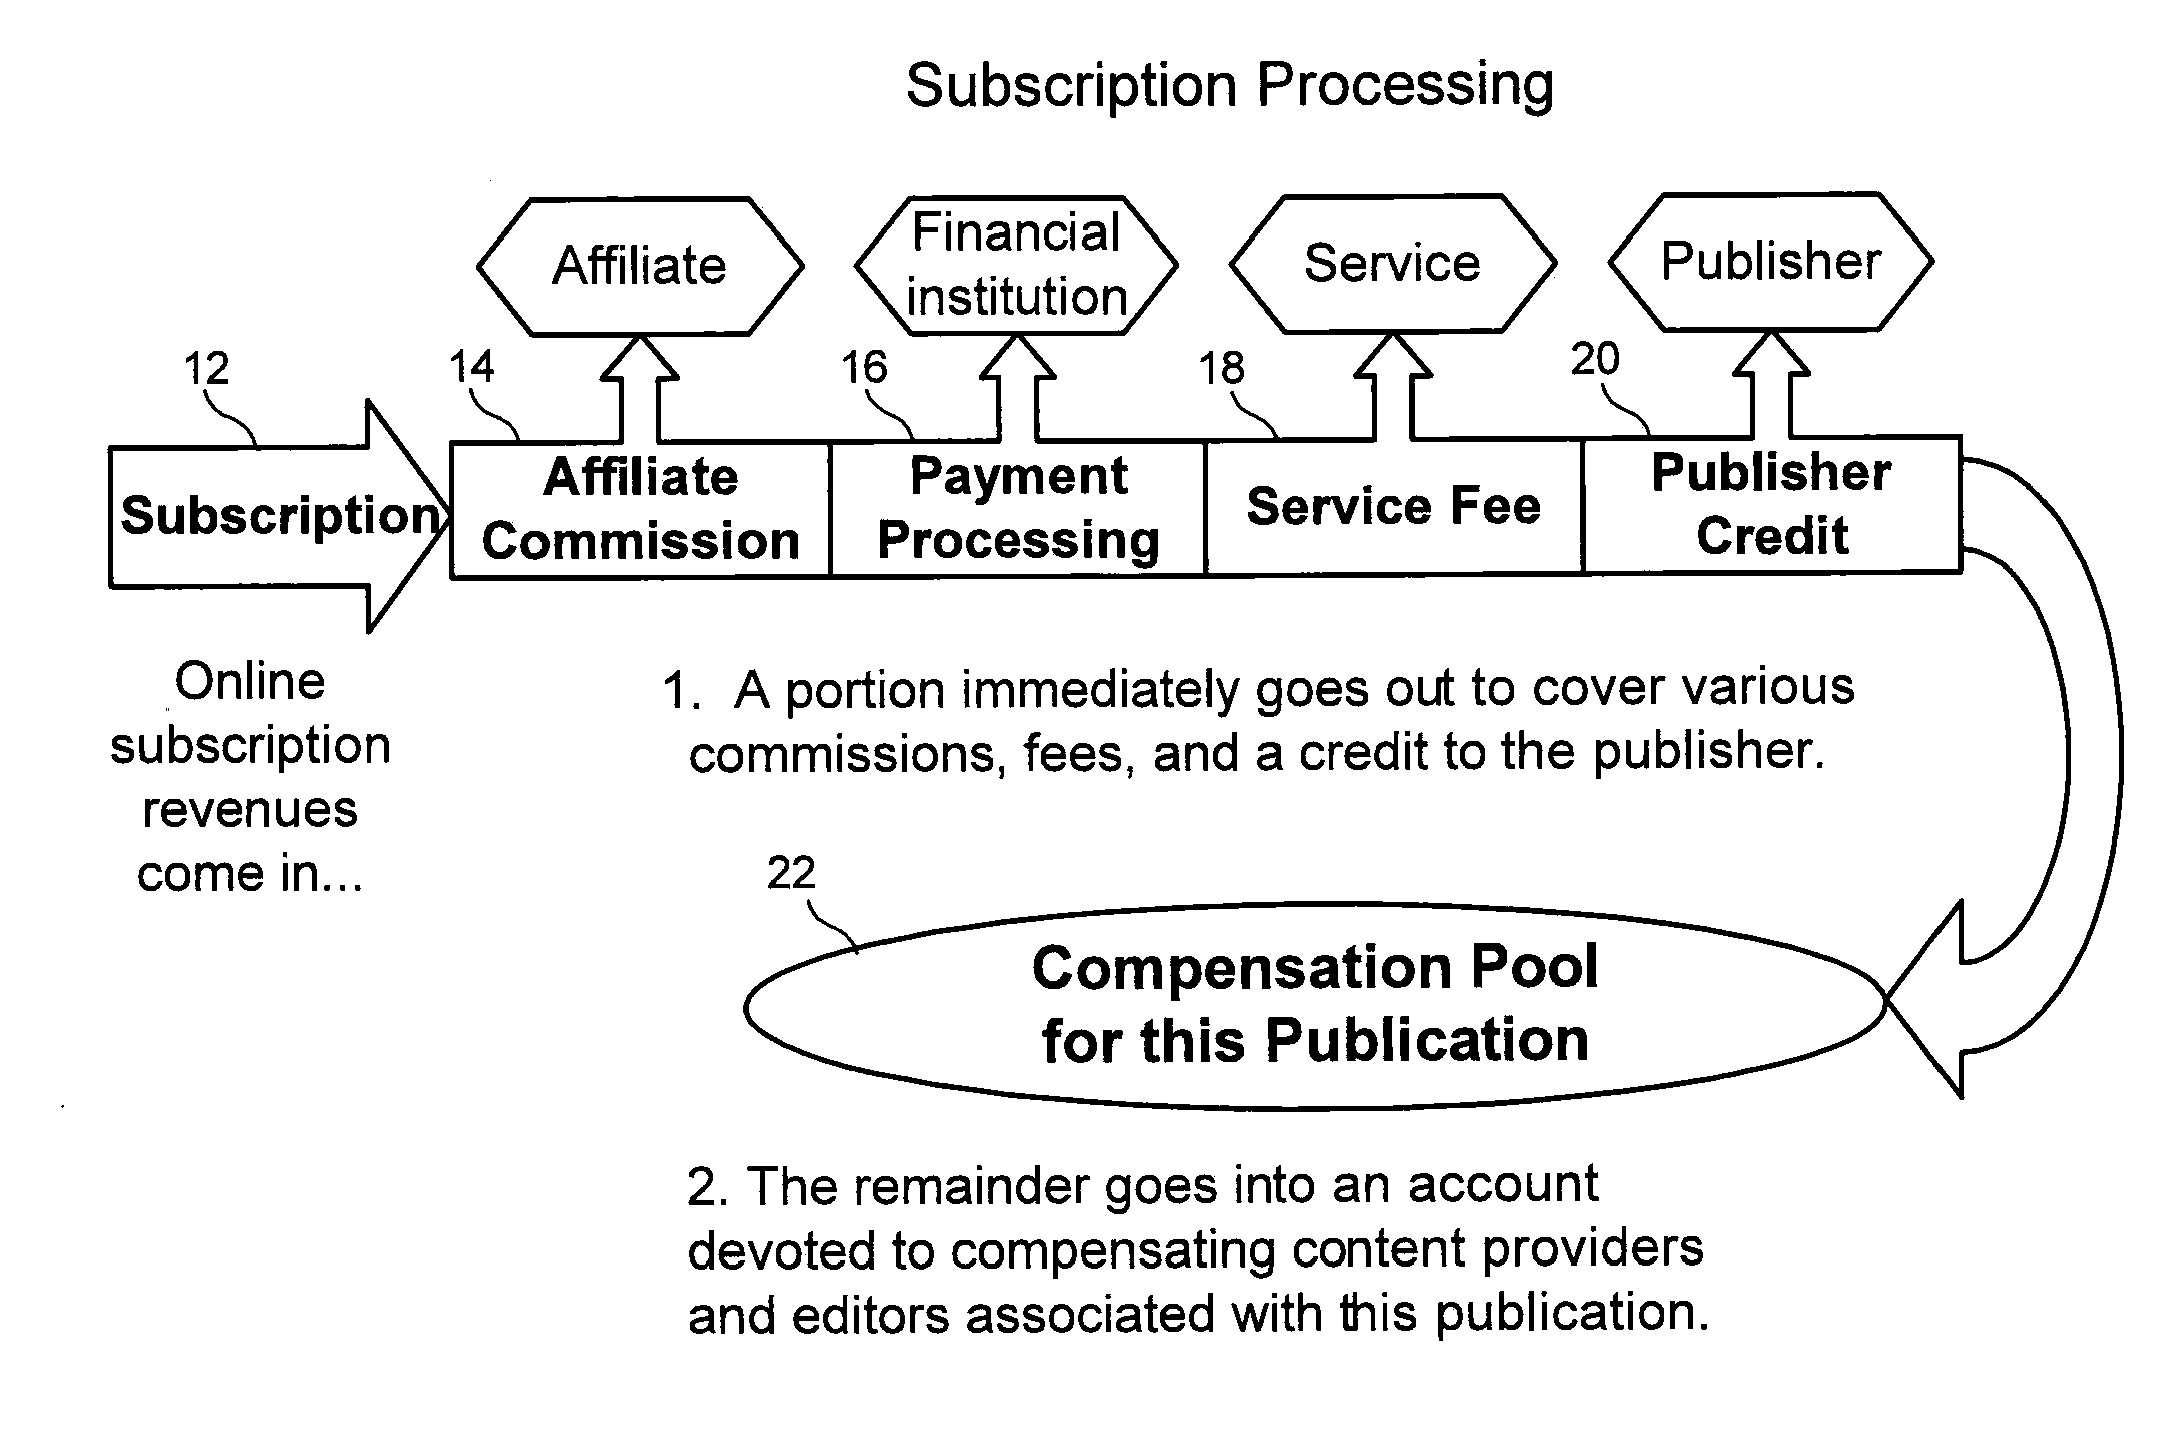 System for digital commerce and method of secure, automated crediting of publishers, editors, content providers, and affiliates